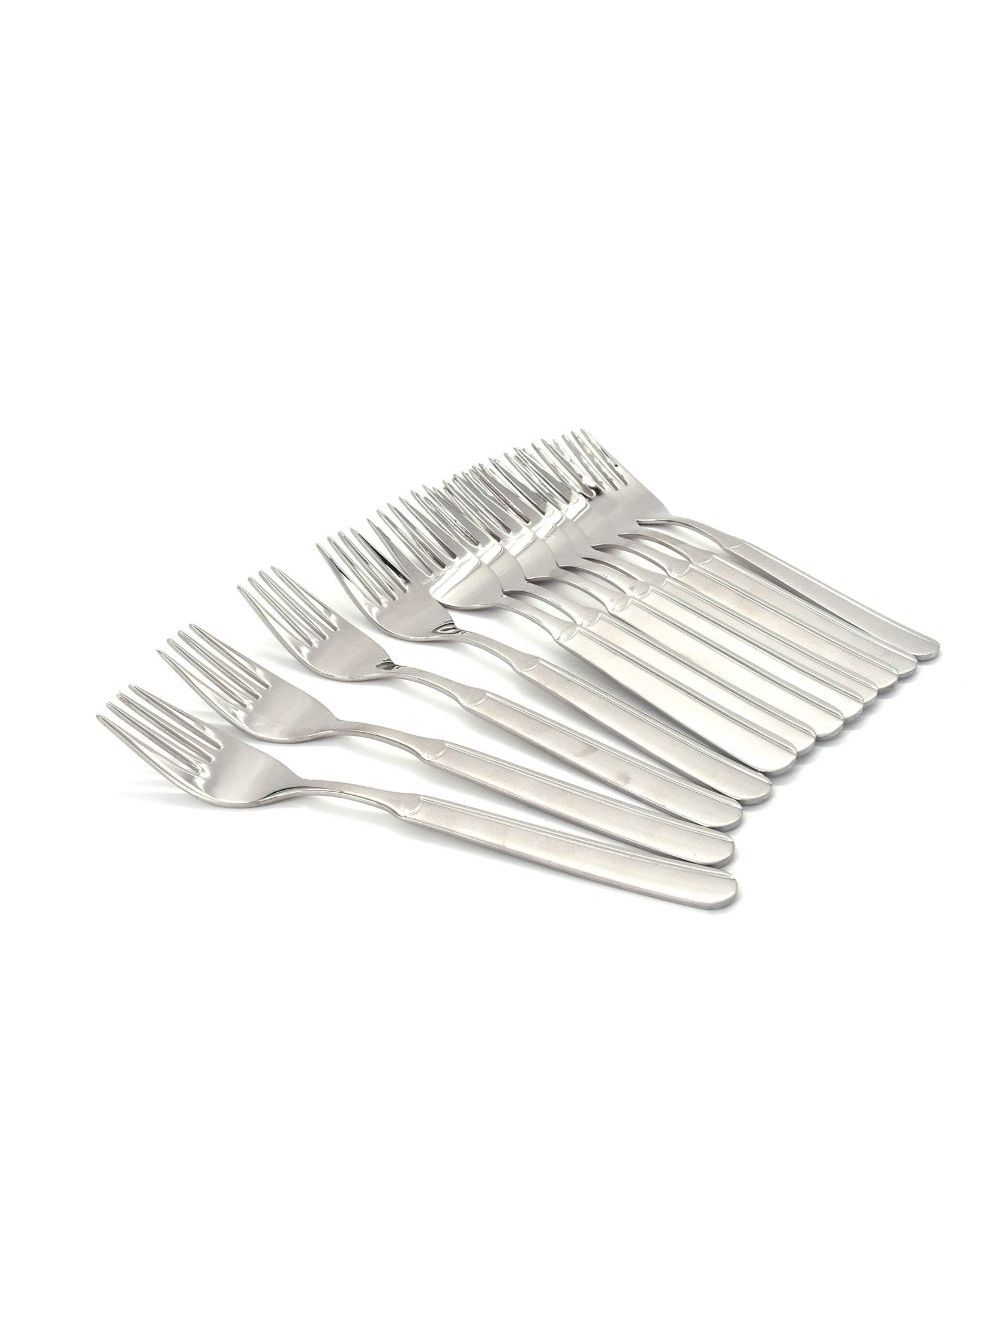 12 Pieces Stainless Steel Table Forks Prince